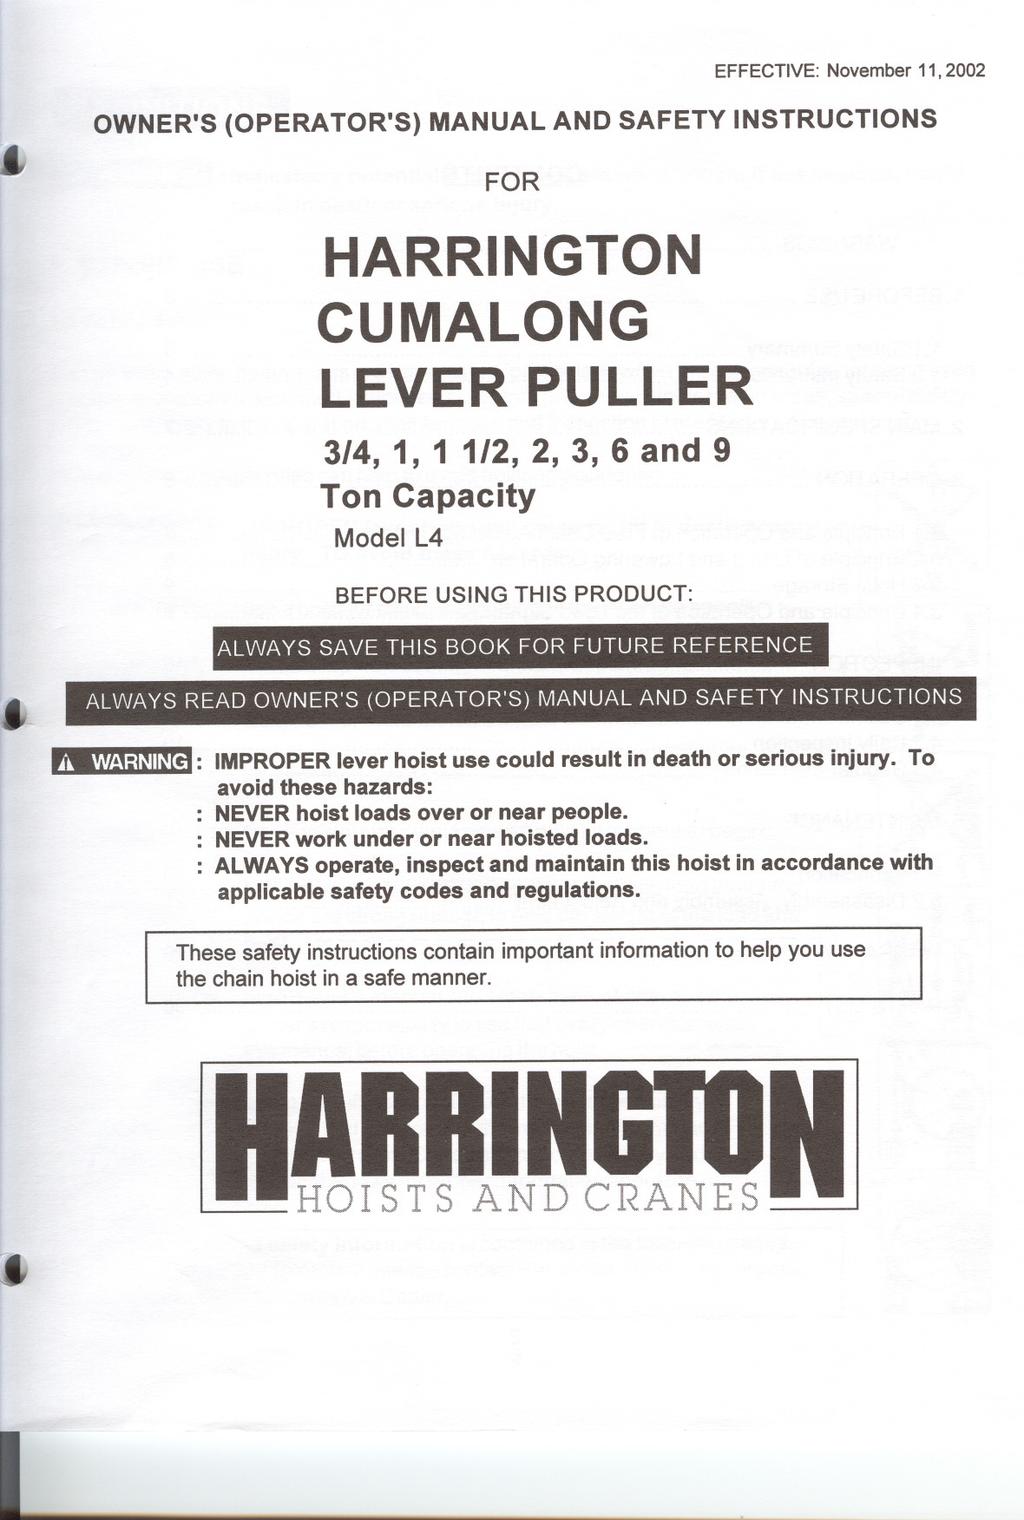 I EFFECTIVE: November, 2002 J, OWNER'S (OPERATOR'S) MANUAL AND SAFETY INSTRUCTIONS FOR HARRINGTON CUMALONG LEVER PULLER 3/4,, /2, 2, 3, 6 and 9 Ton Capacity Model L4 Jt.